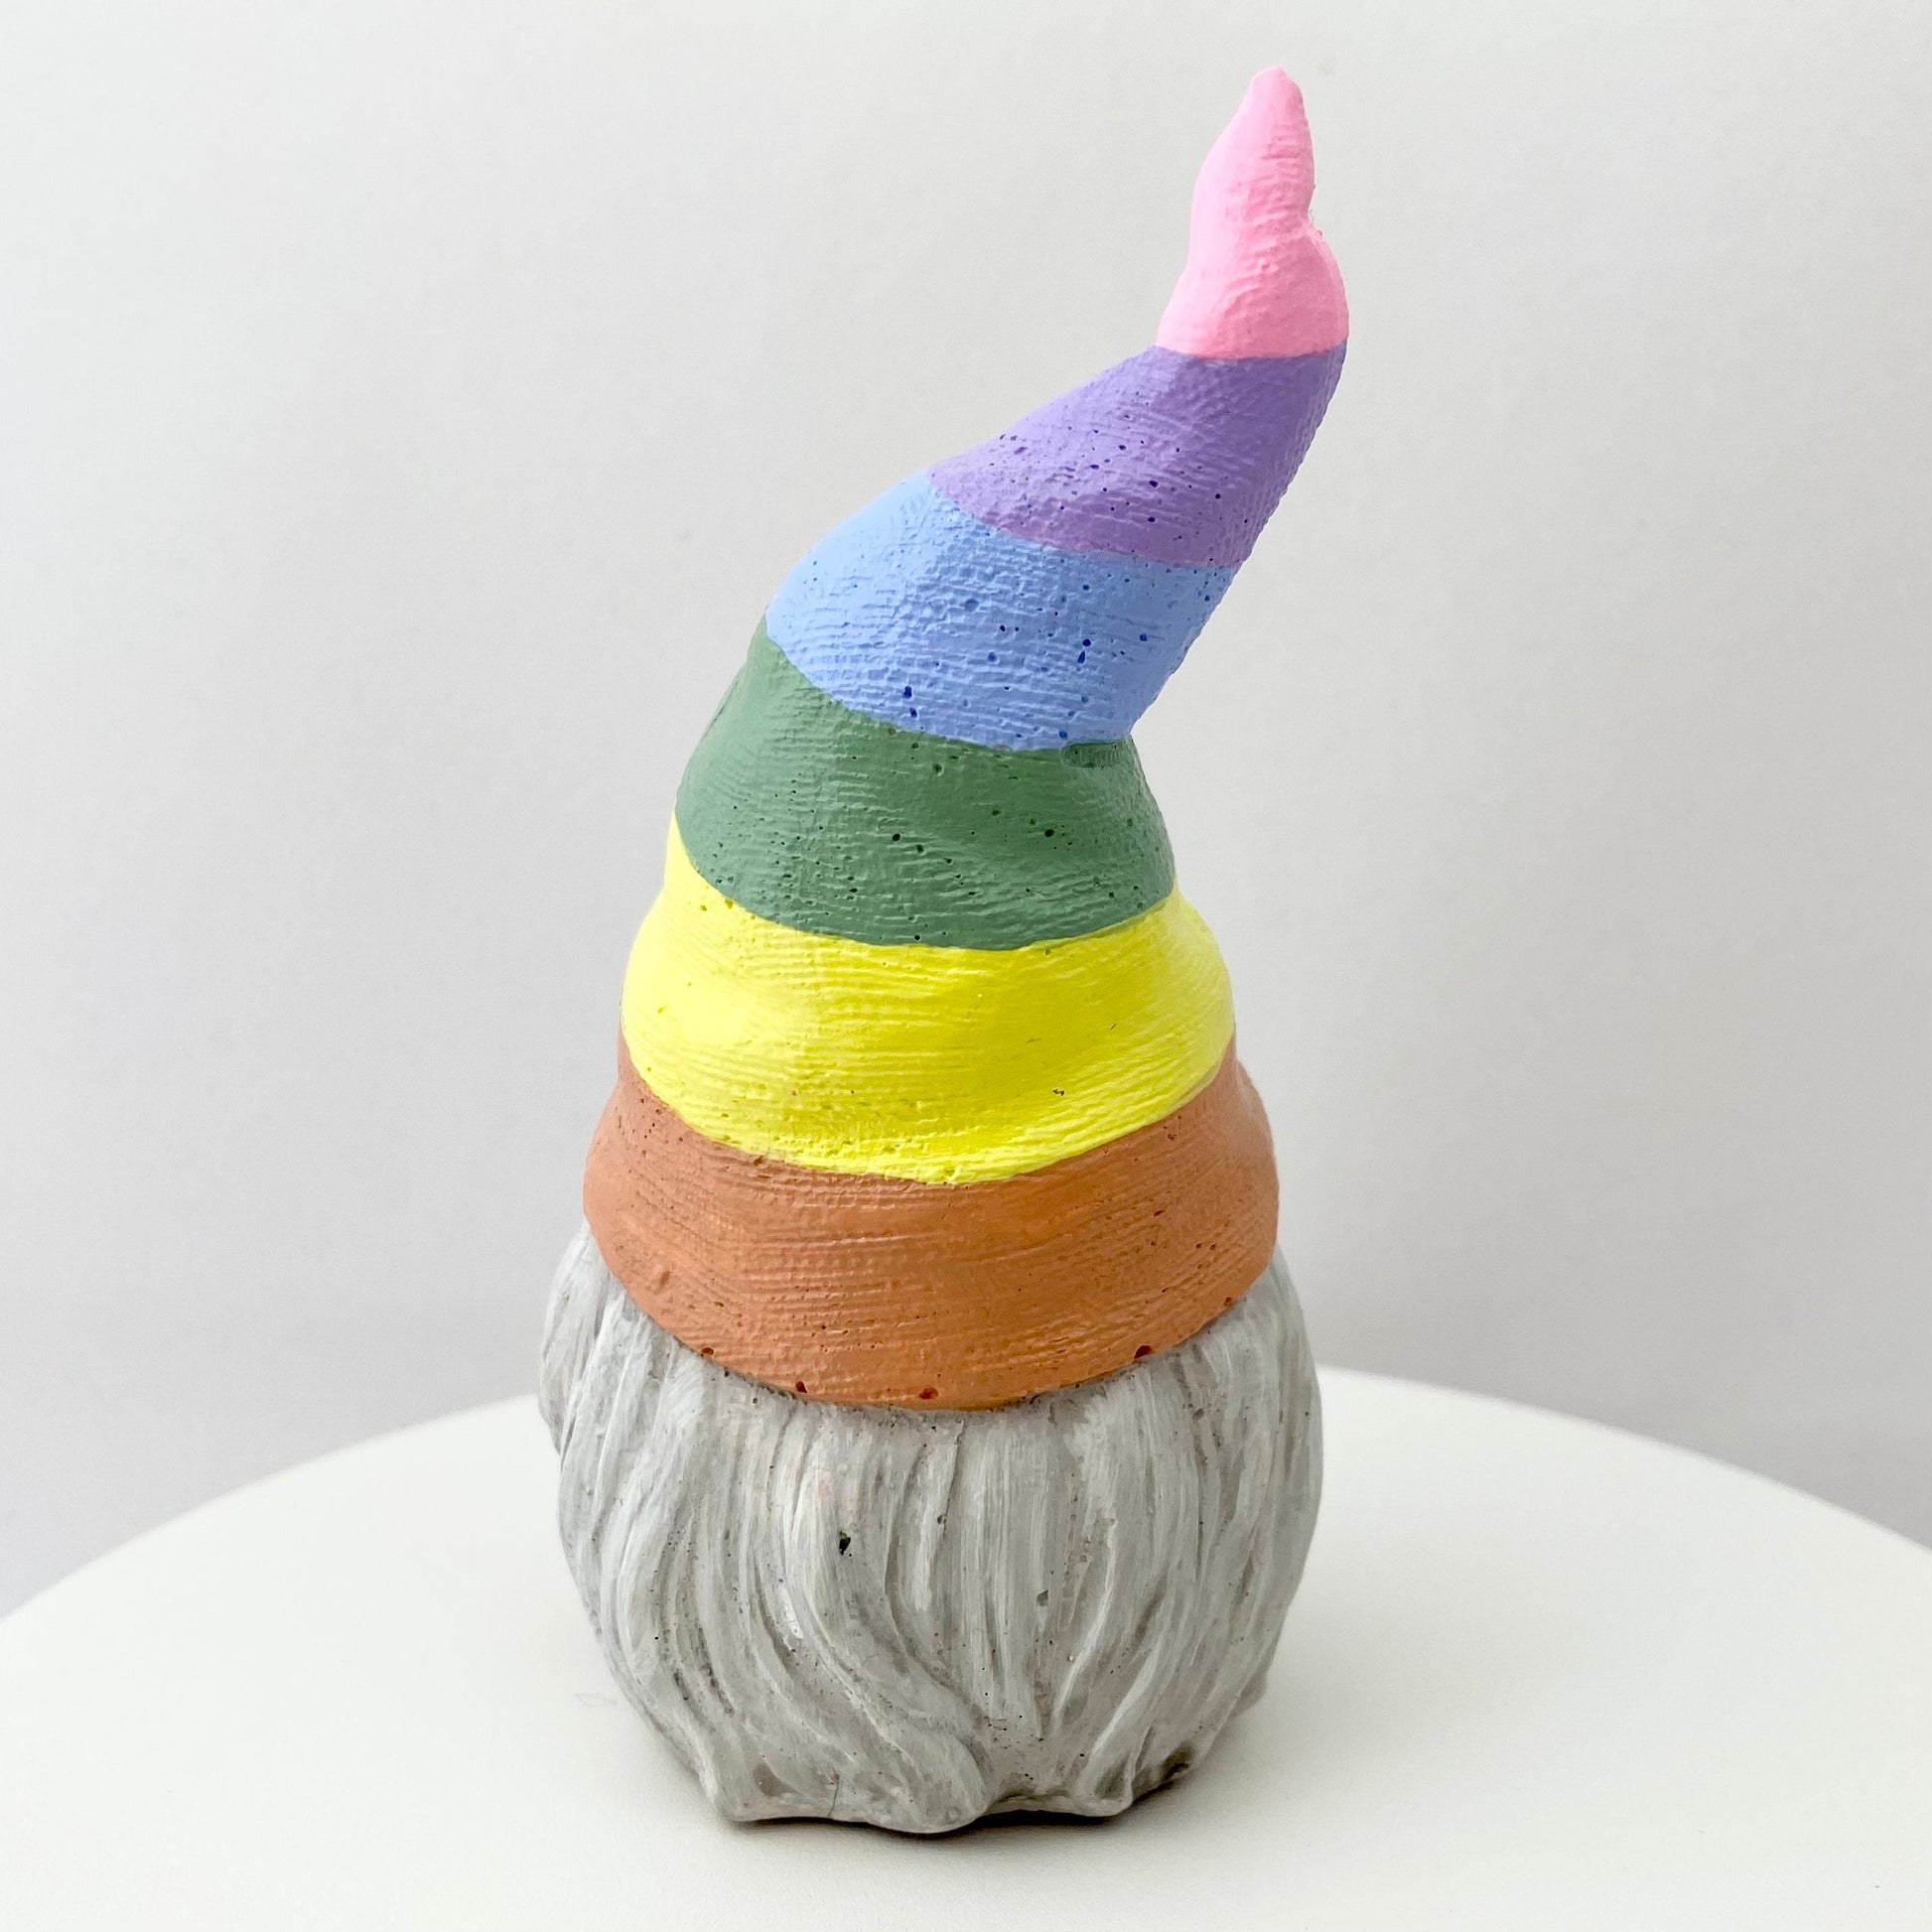 Hand painted Gonk statue with pastel rainbow striped hat